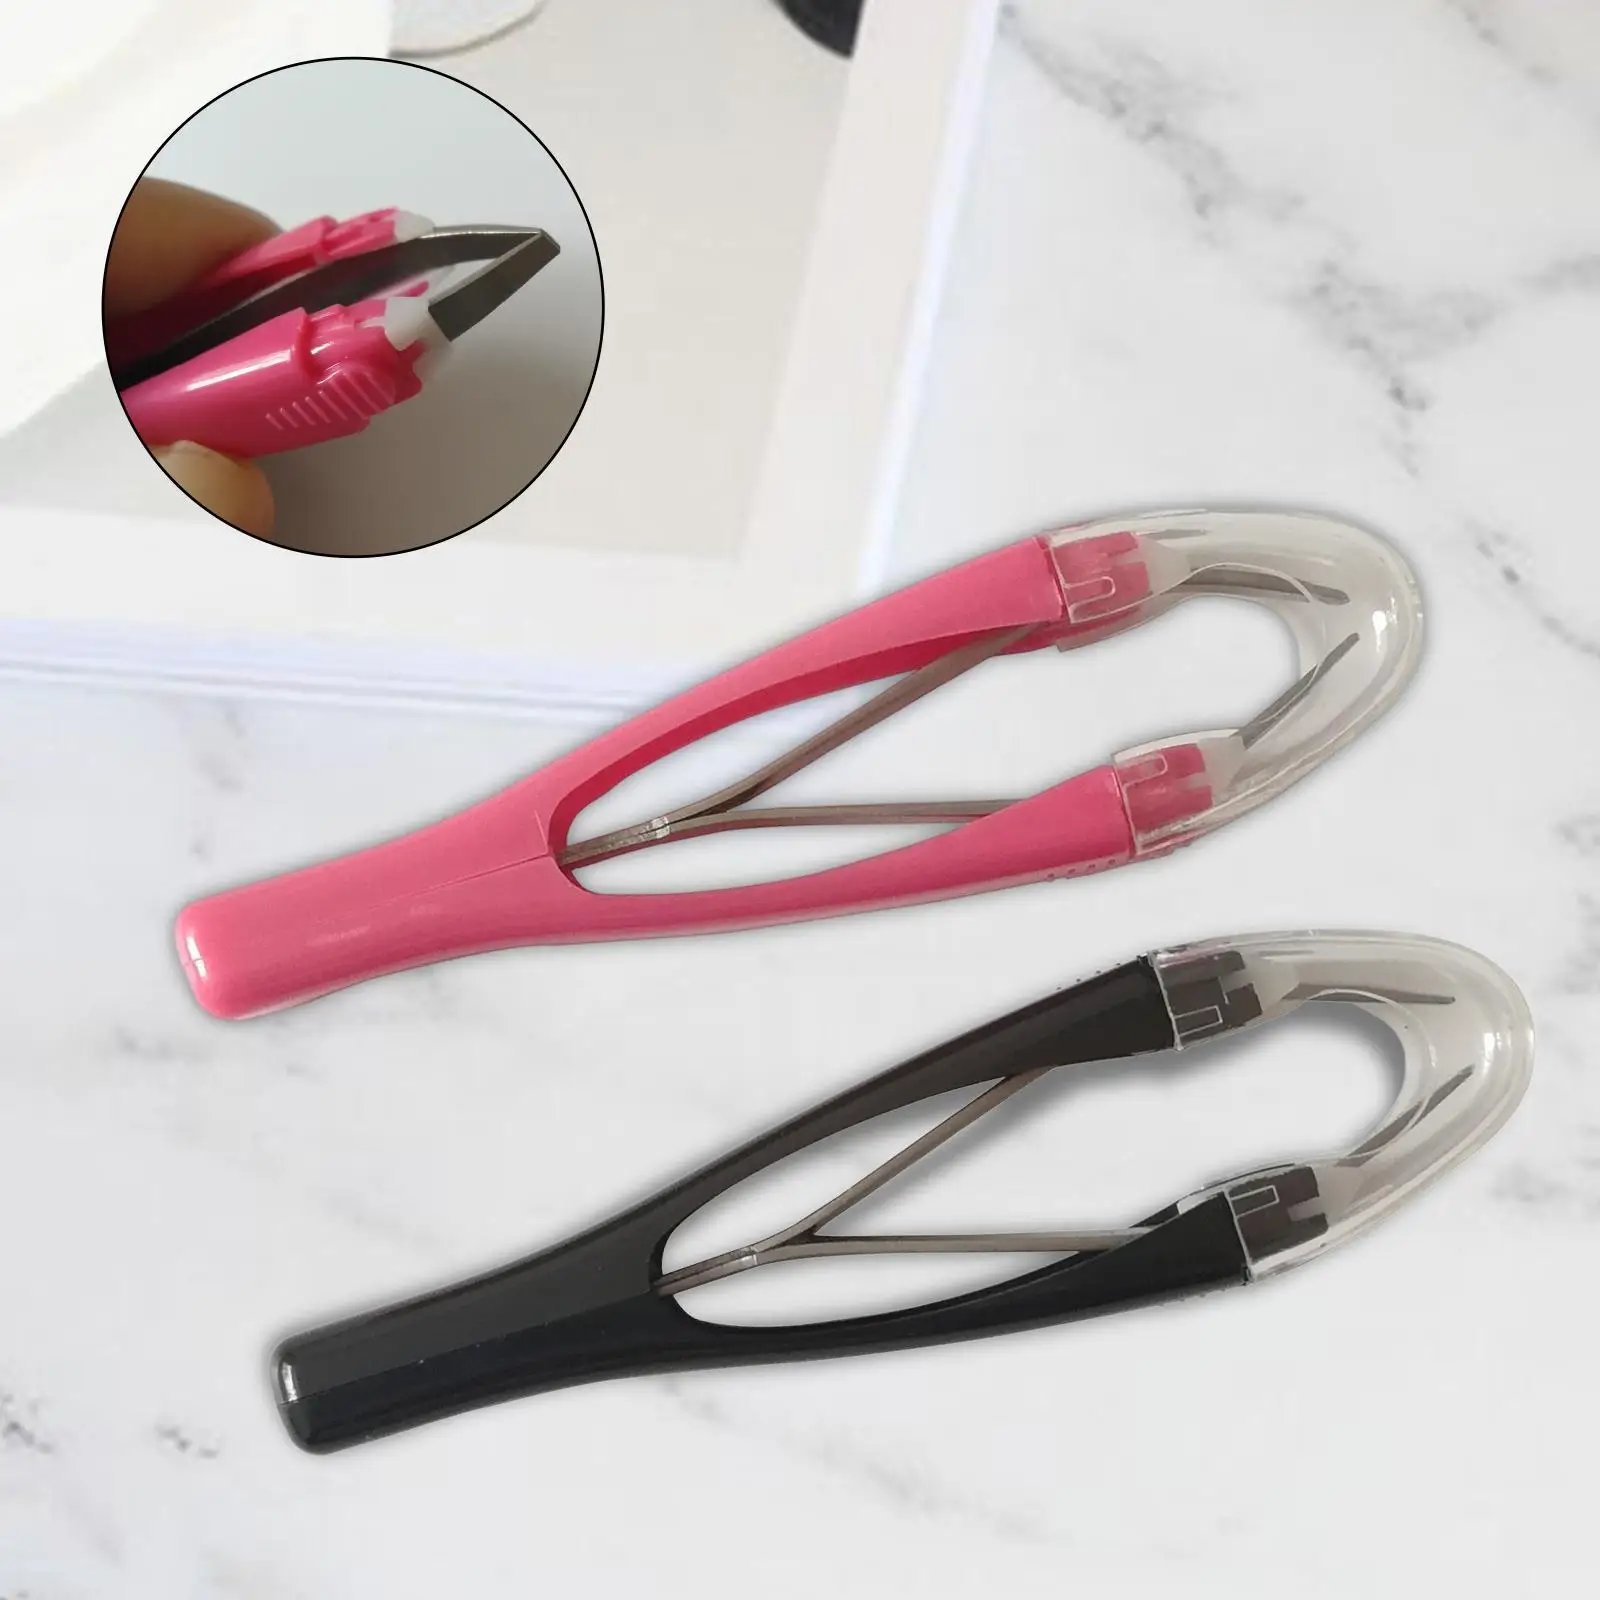 Eyebrow Tweezers Slant Tip Cosmetic Beauty Tool Professional Retractable Makeup Supplies Eyebrow Removal Clip for Home Beginners